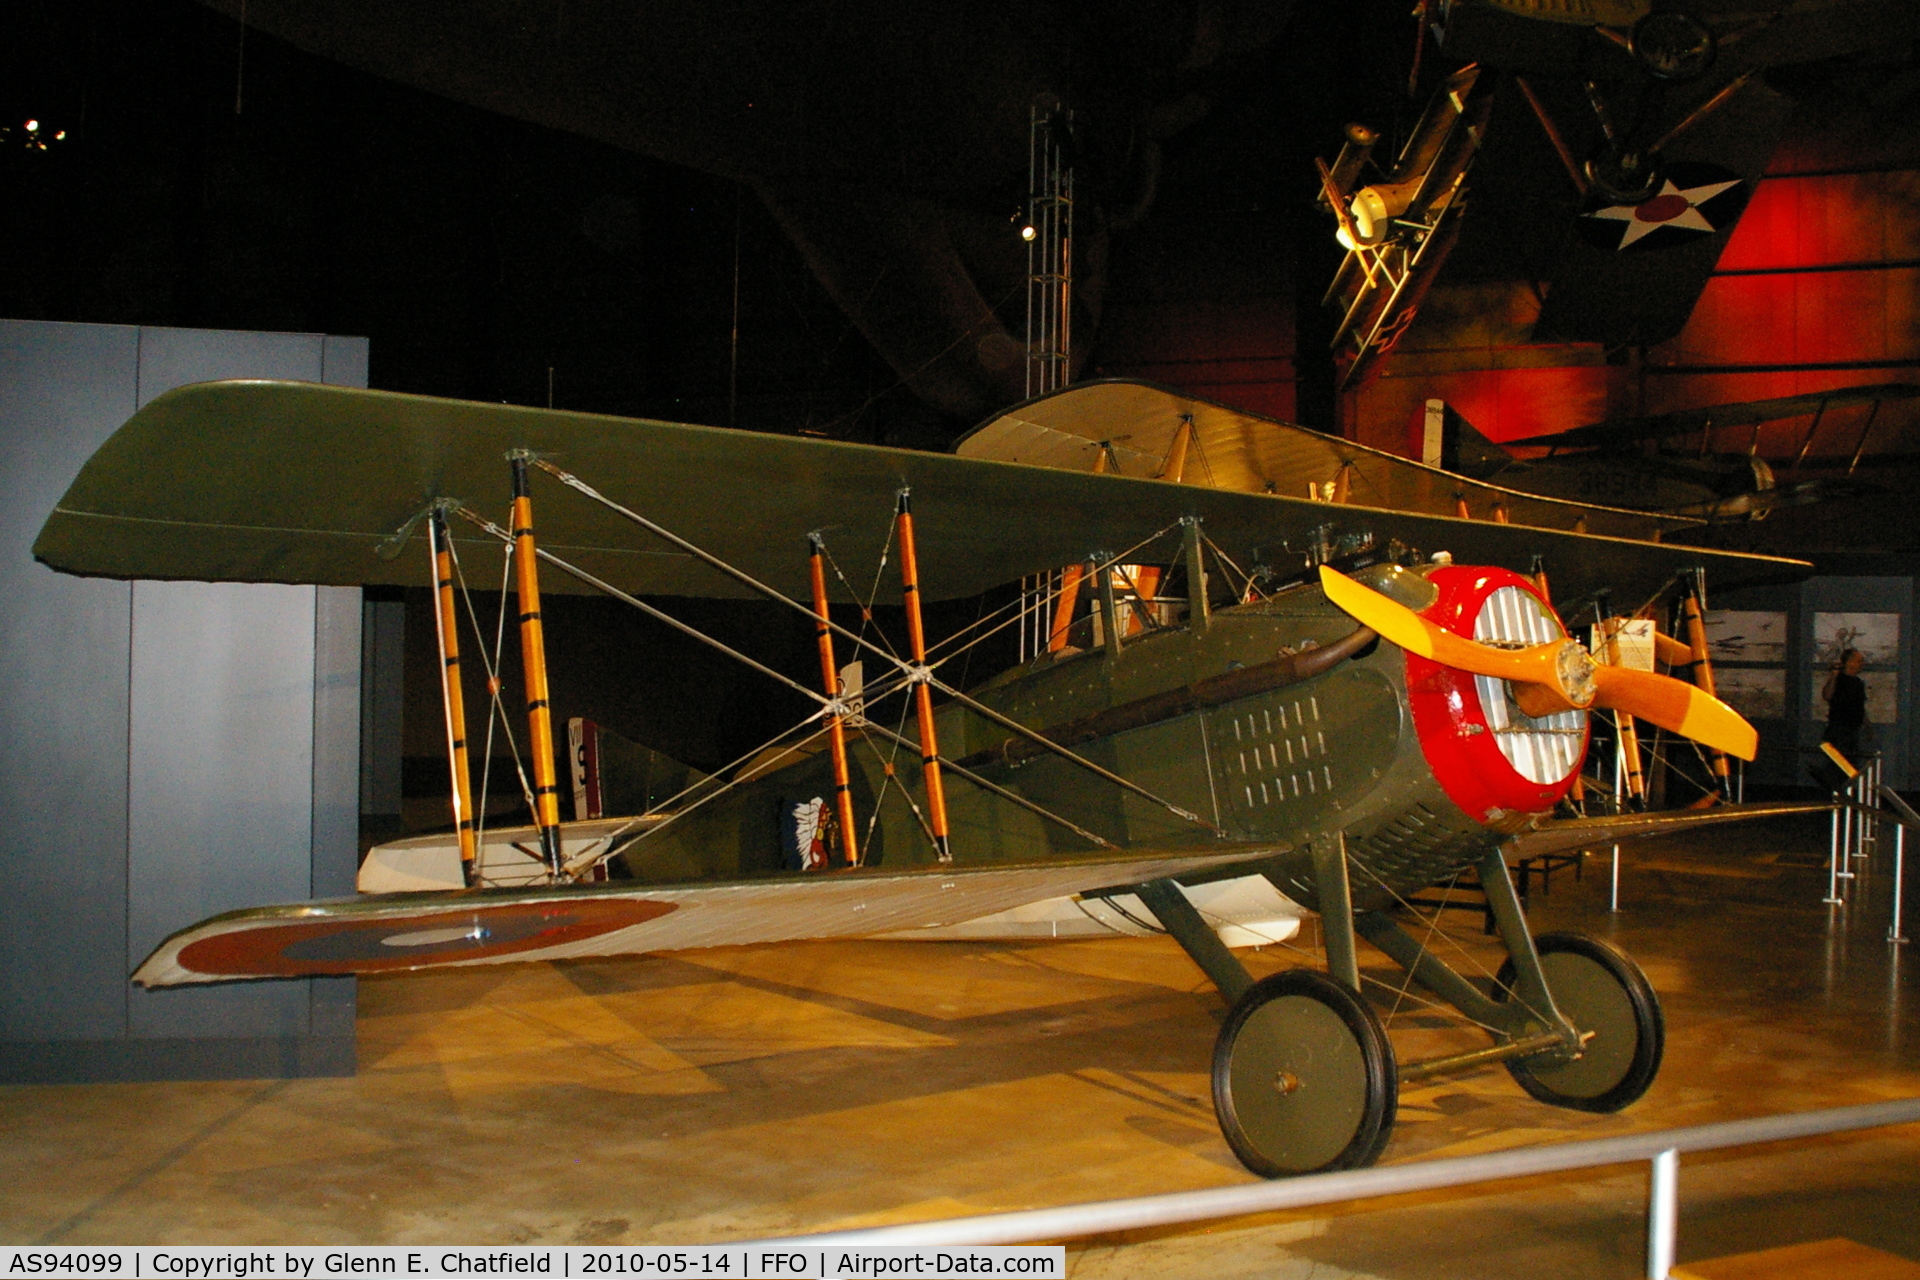 AS94099, SPAD S-VII C/N Not found AS94099, At the National Museum of the USAF. Freshly restored